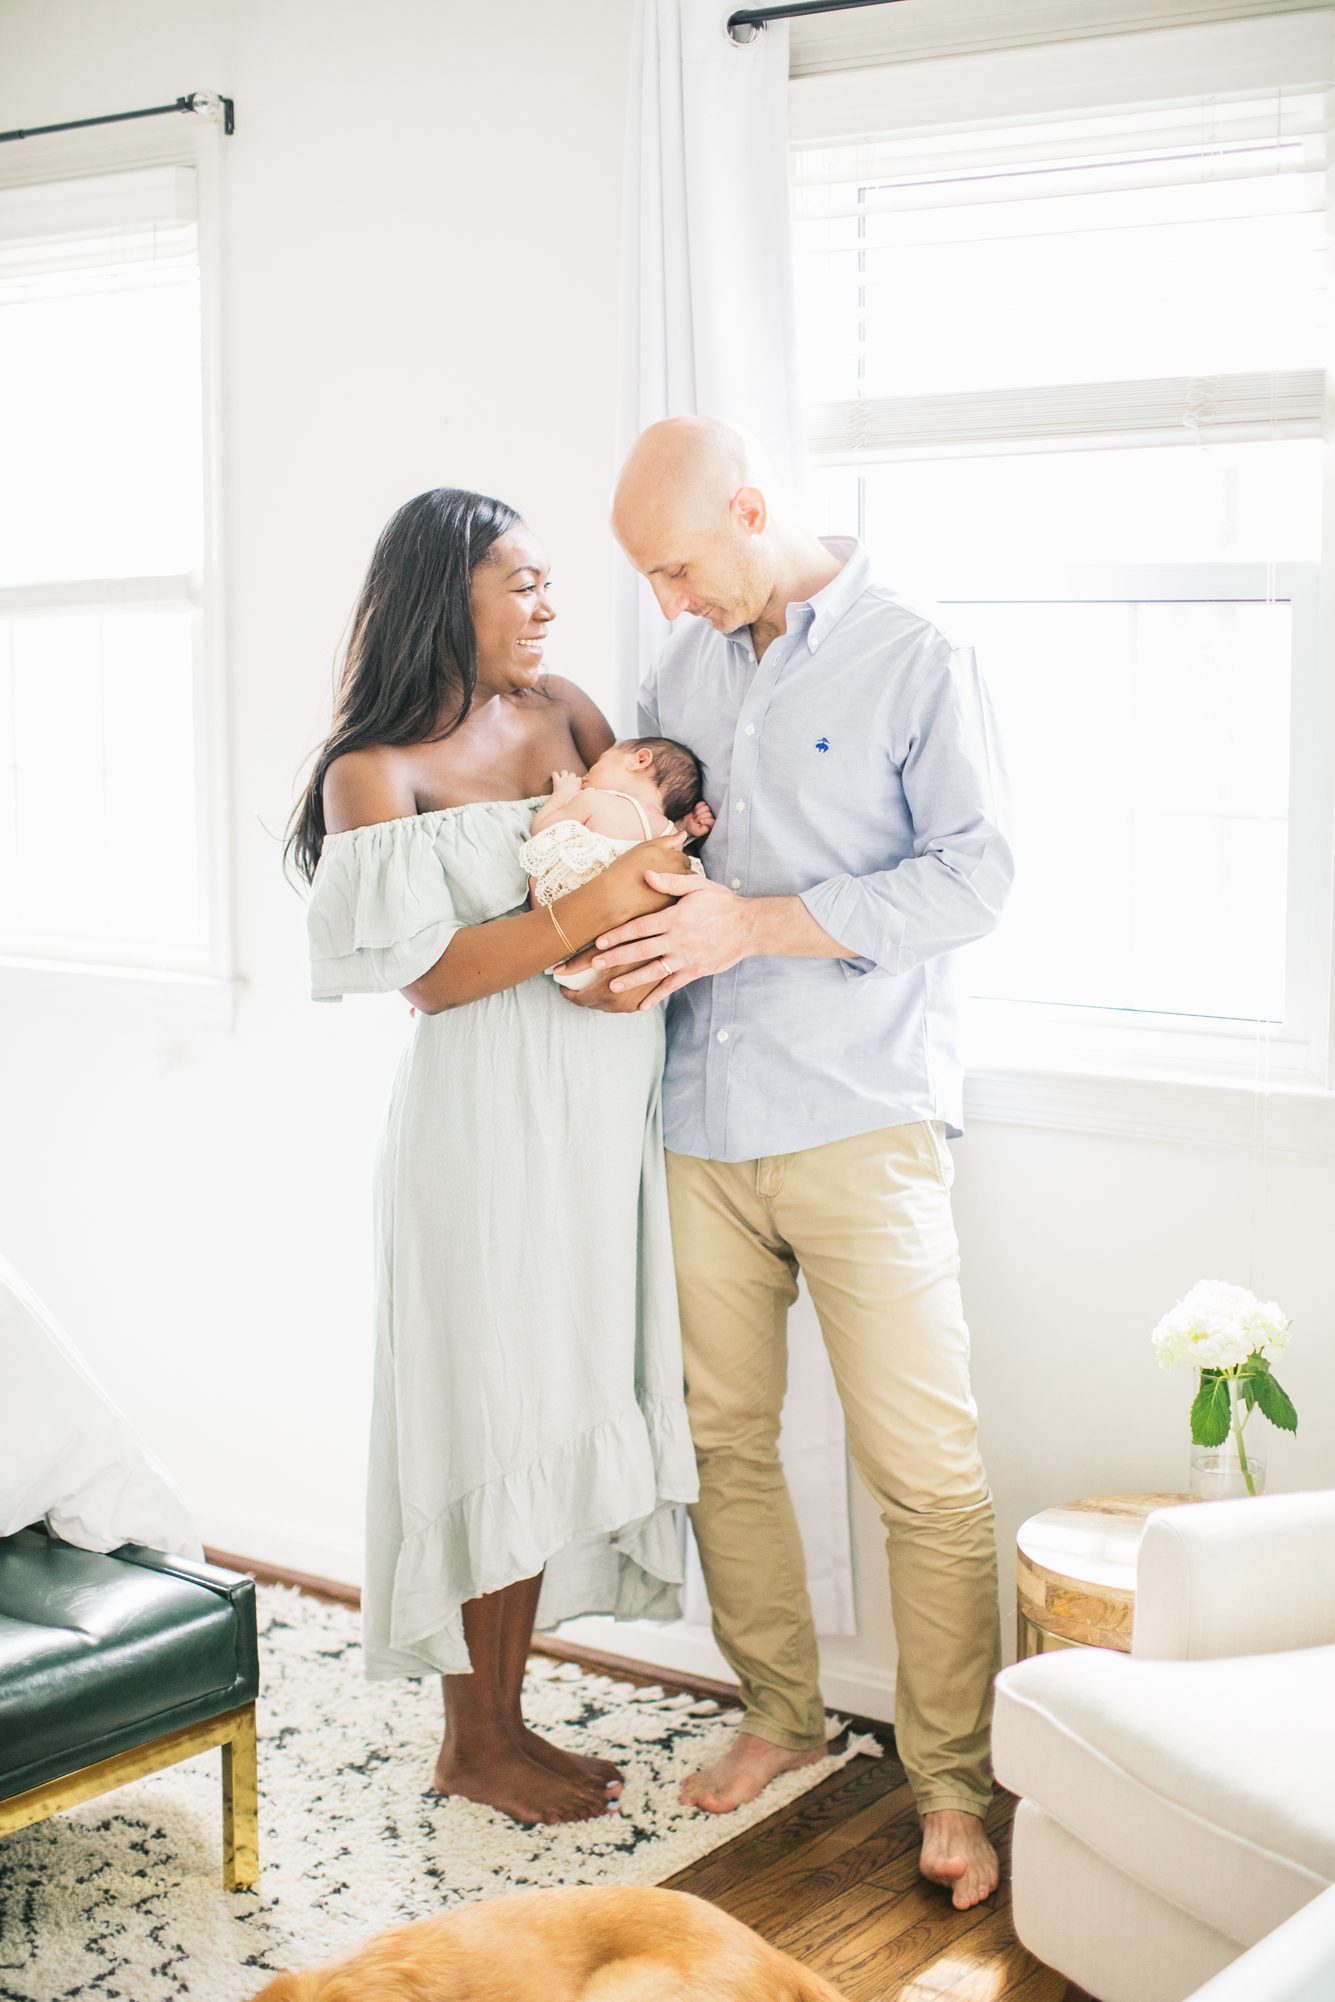 New parents holding baby and smiling near windows of bedroom. Photo by LRG Portraits.